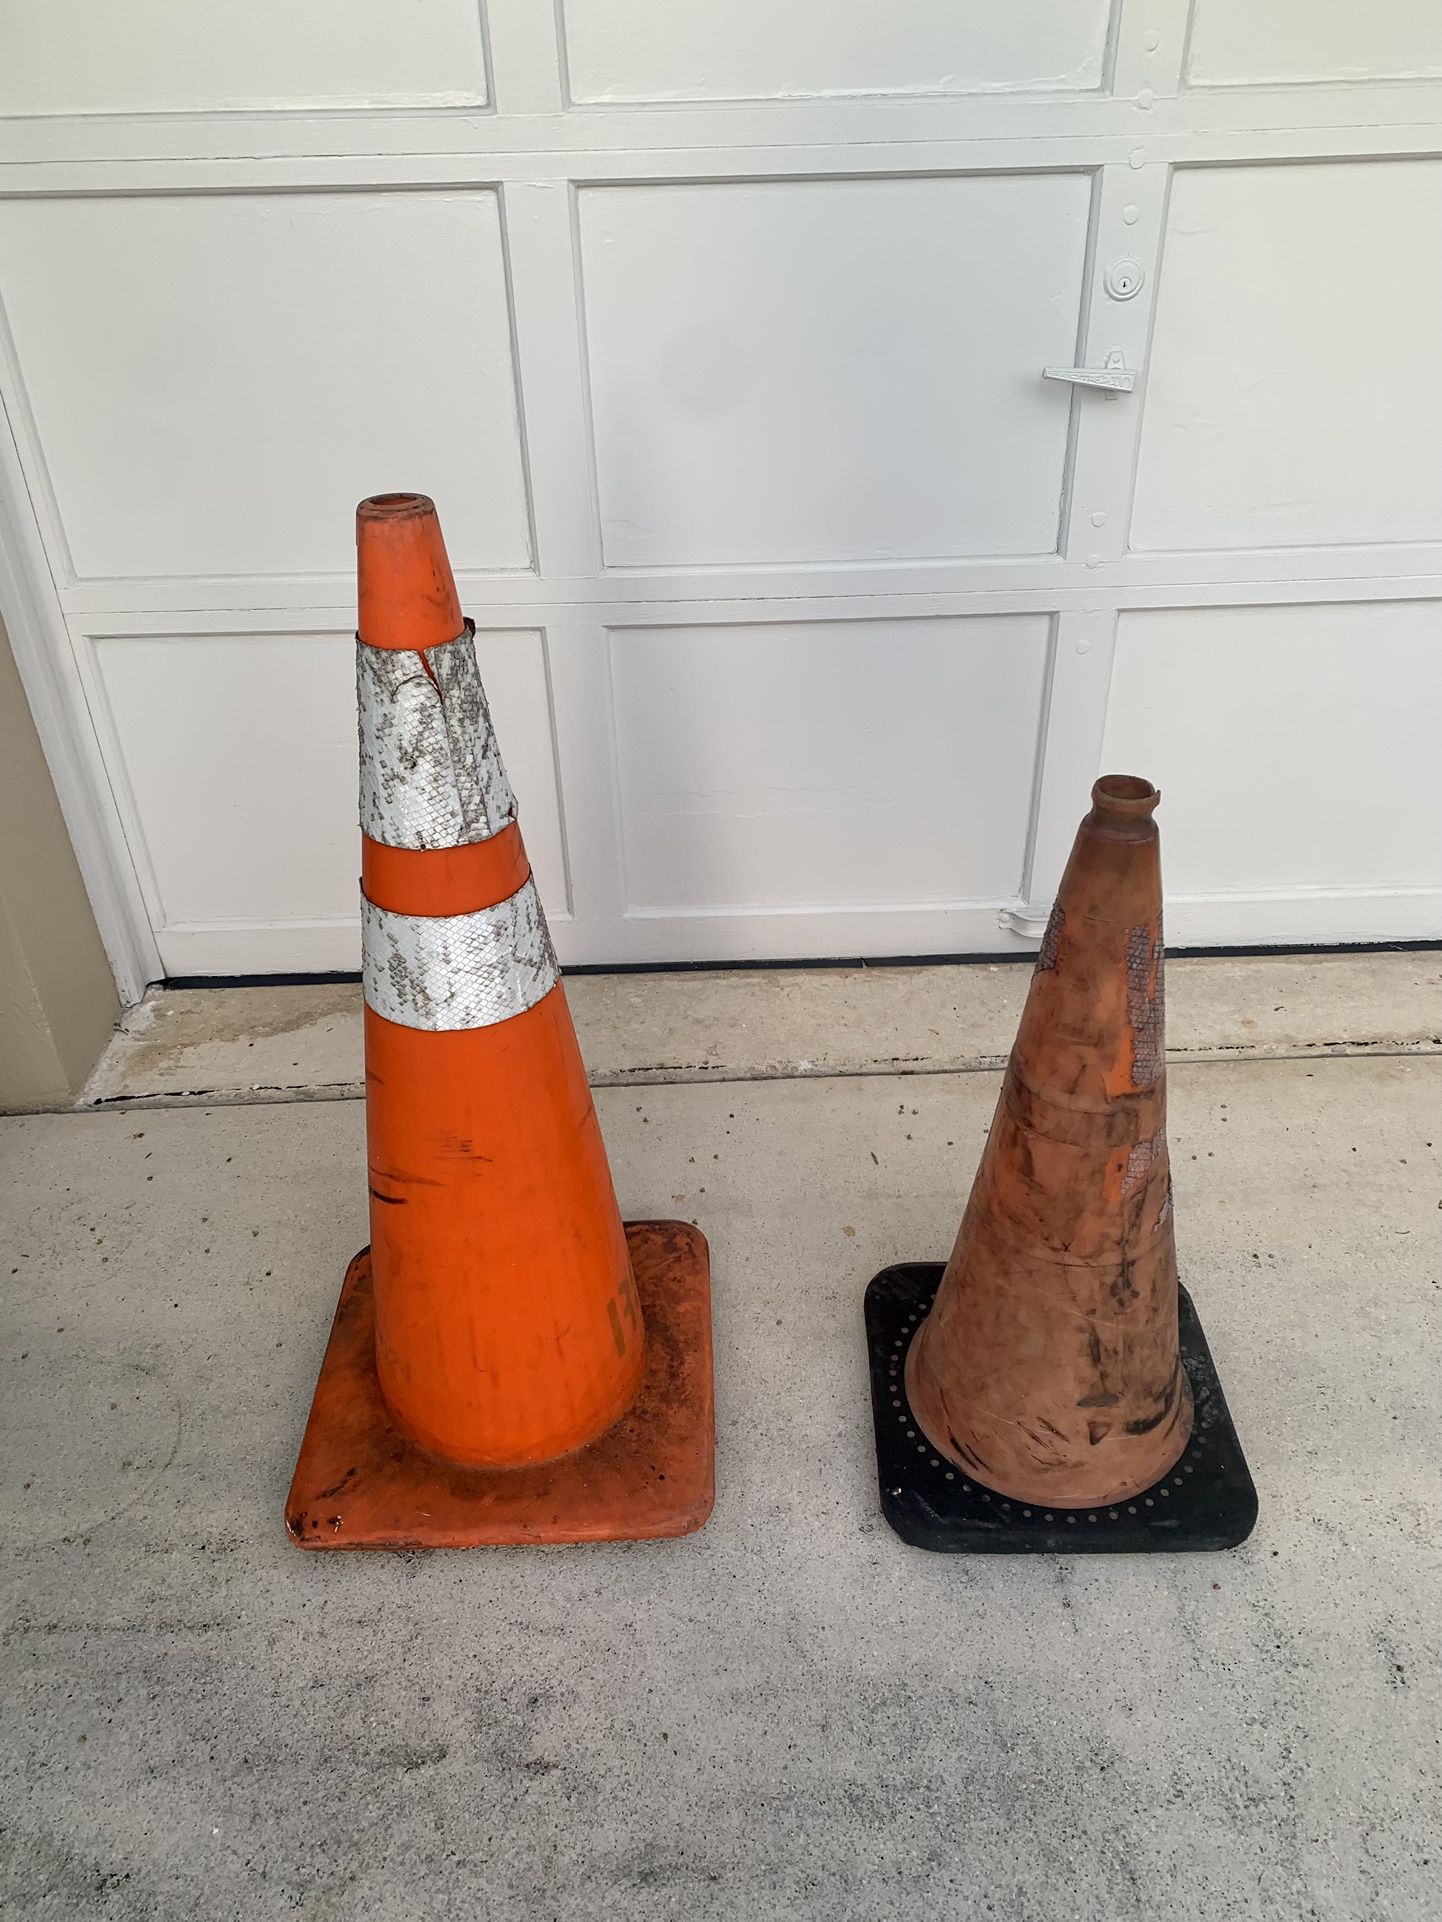 Preowned set of two orange construction cones